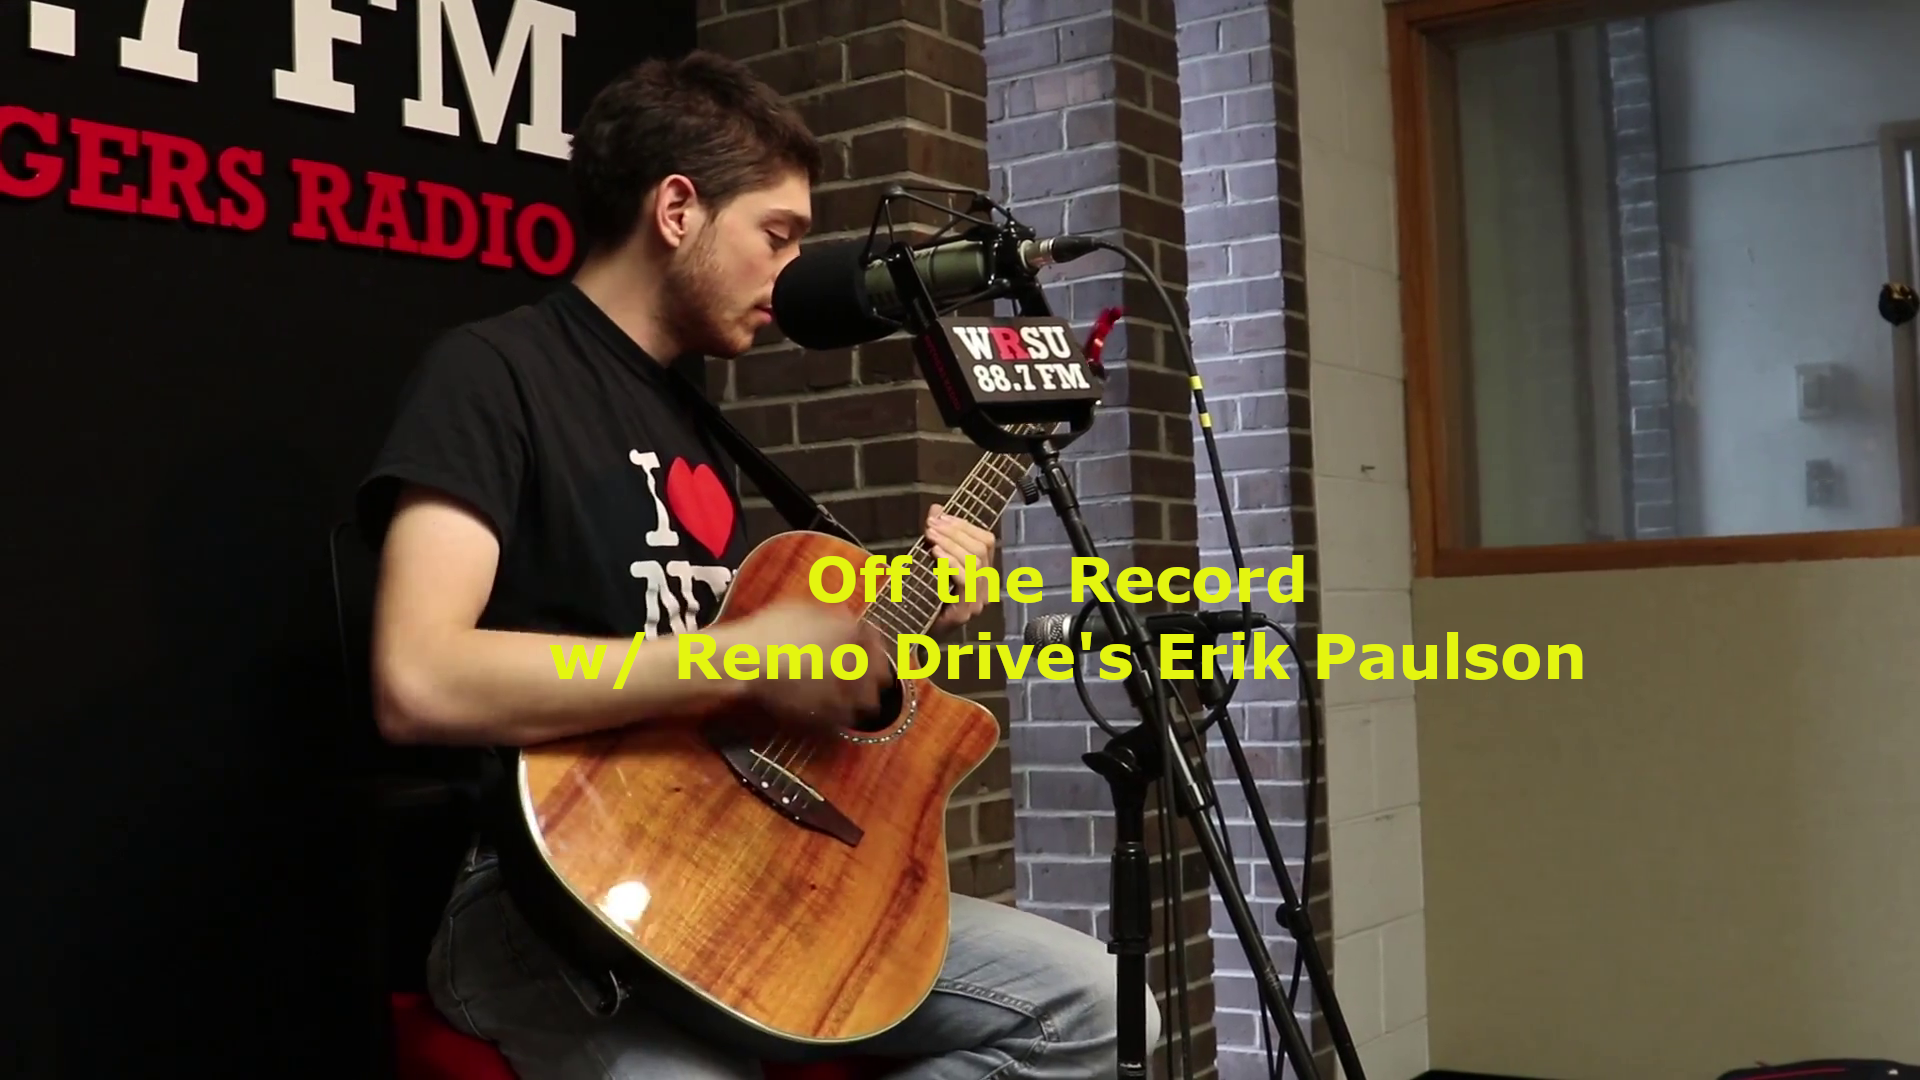 Nov 2, 2019 Erik Paulson of the band Remo Drive stops by the station to perform songs off of ^Natural, Everyday Degradation^ and talks with WRSU correspondents Connor Boxczyk and Danielle Ciampaglia about the Minnesota music scene, his dream restaurant, and the bands changes in sound since ^Greatest Hits^<br/>The bands recent album is Natural, Everyday Degraduation<br/>Videod by: Cristina DiFlorio & Joey Schilke<br/>Edited by: Danielle Ciampaglia & Allen Uzoma